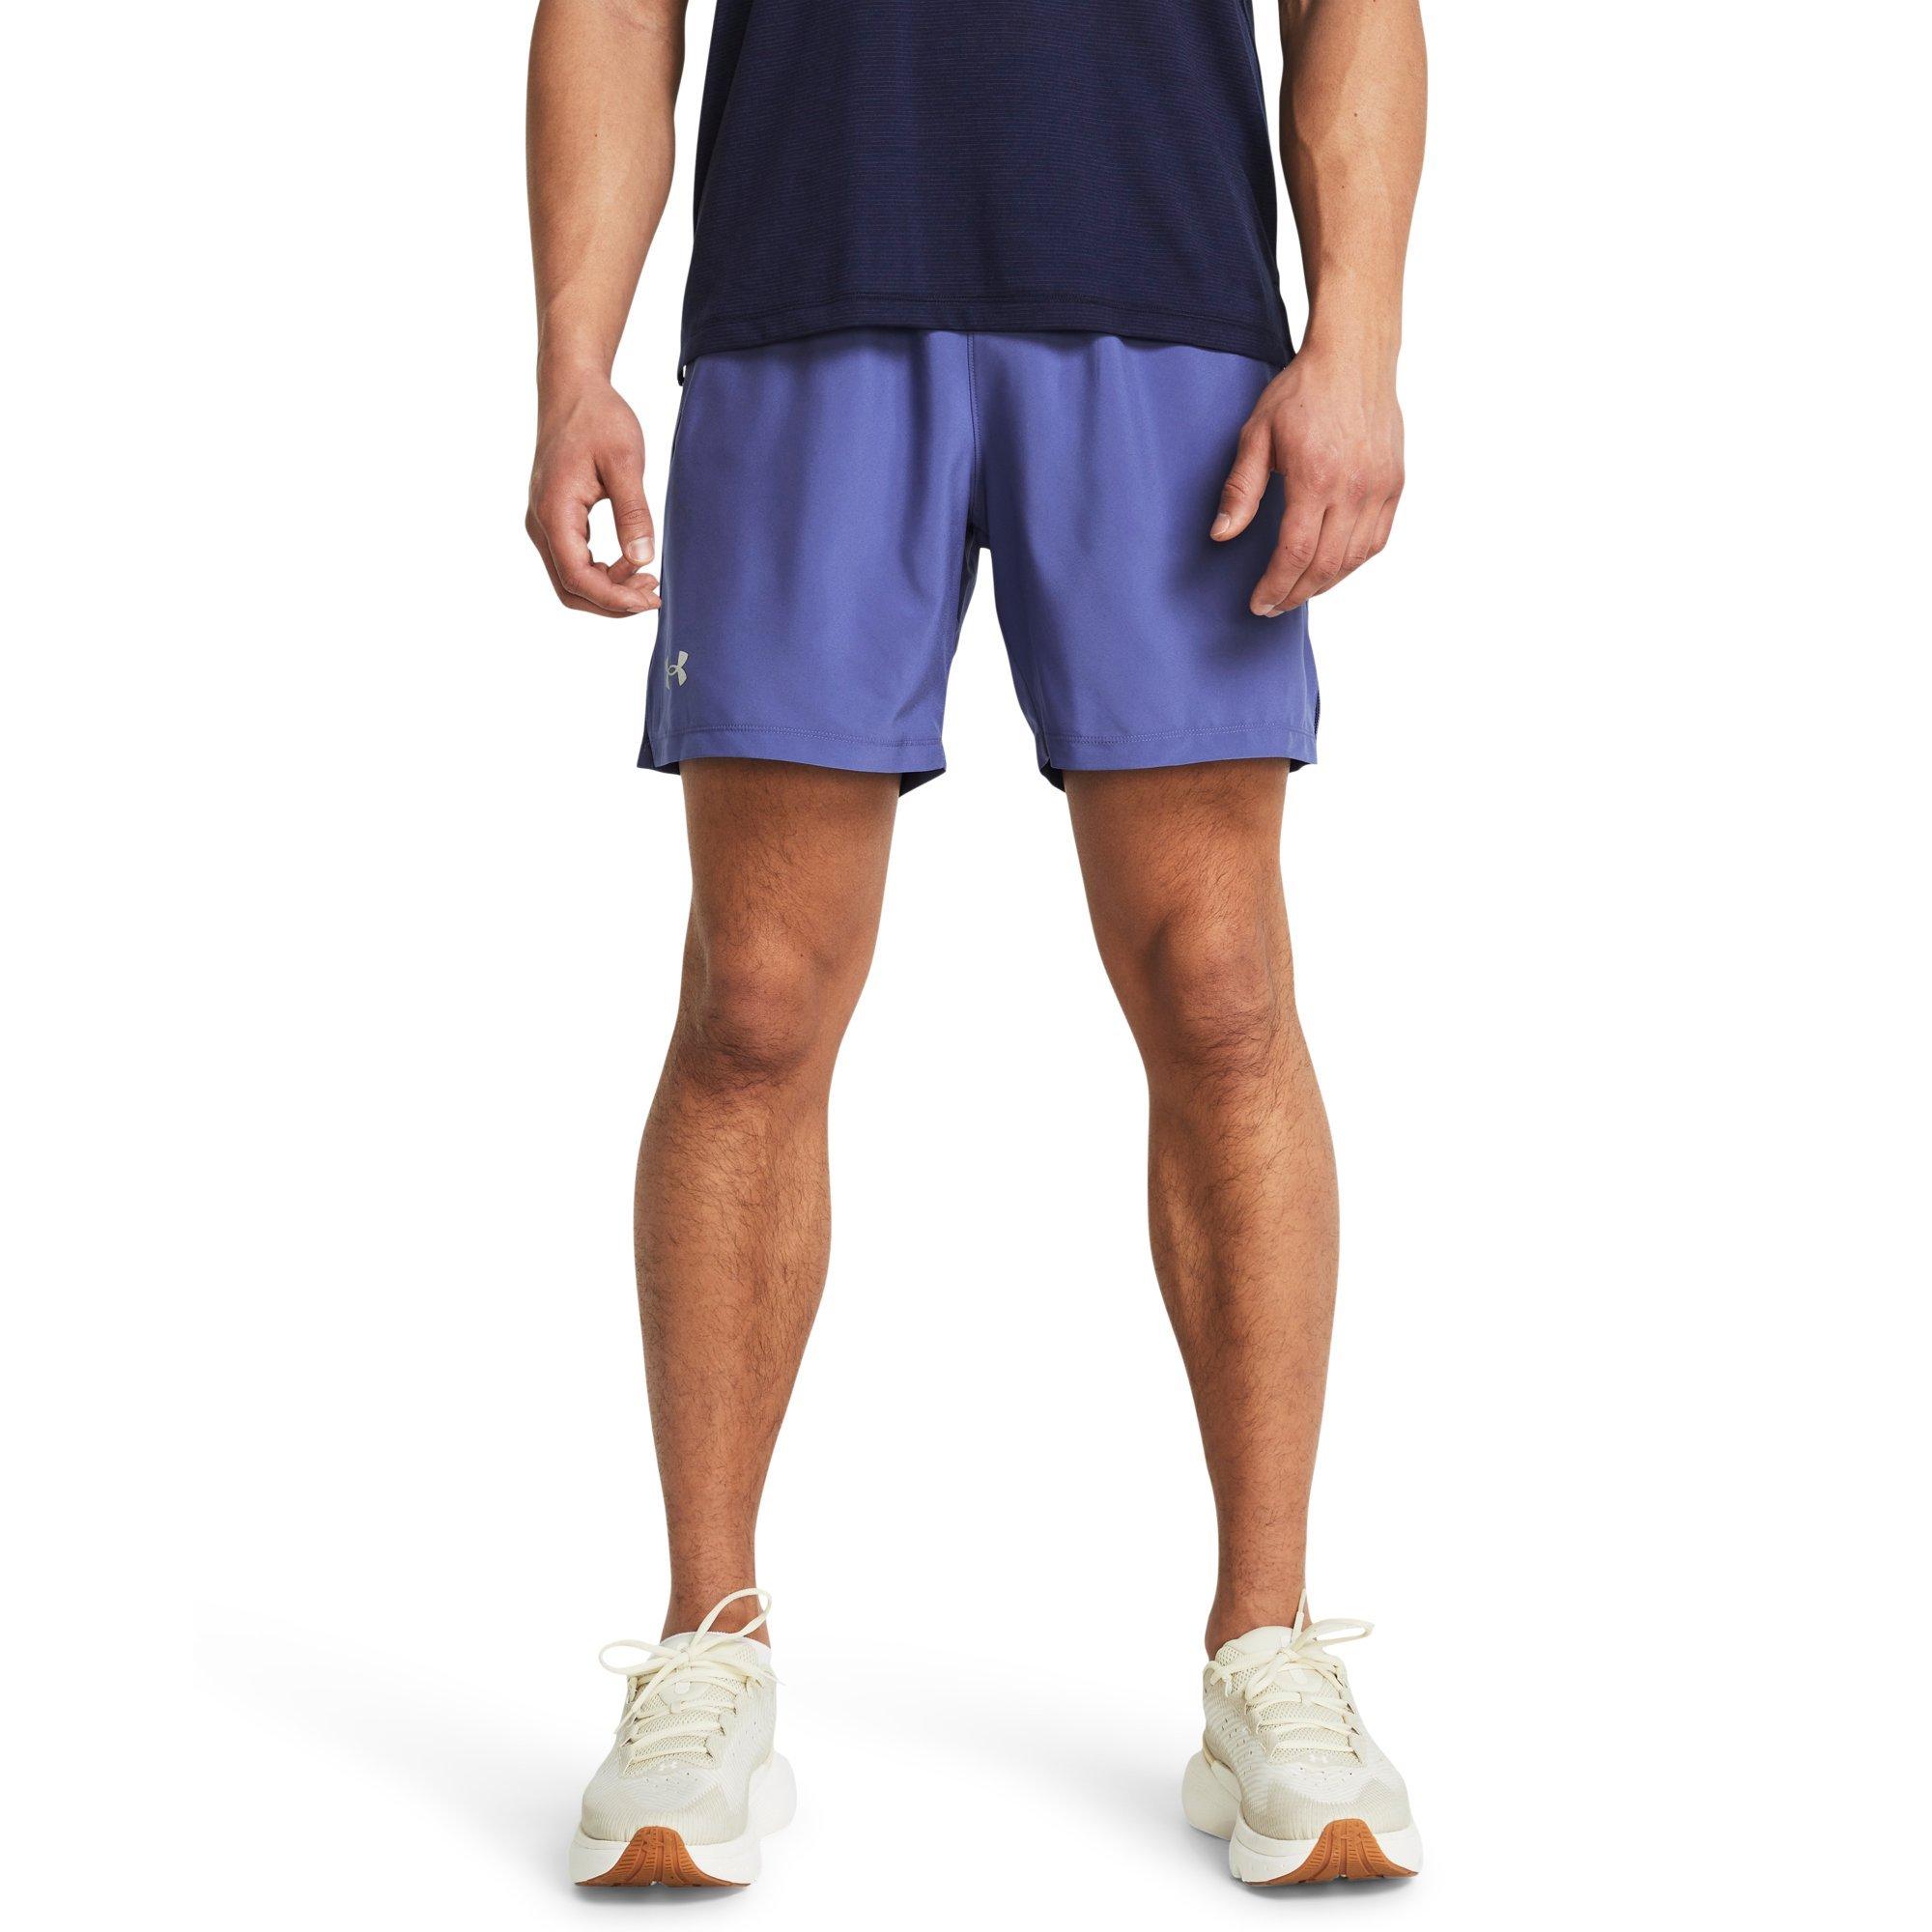 Under Armour Launch 7in. Pocket Running Shorts